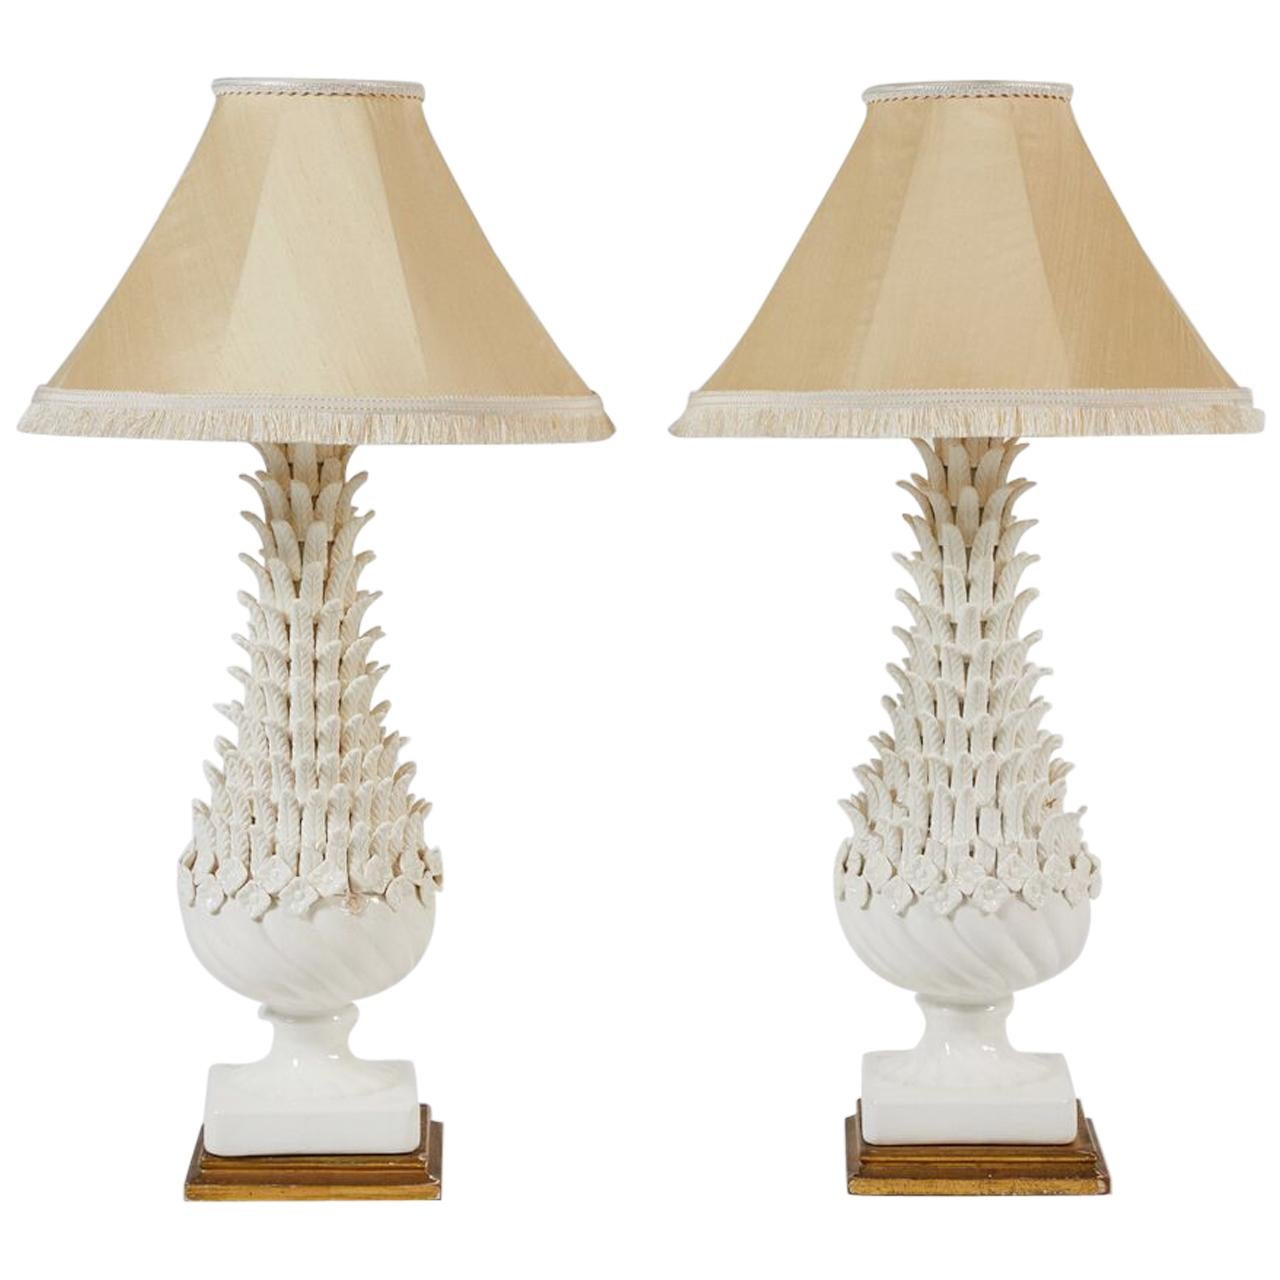 Pair of White Manises Glazed Pottery Table Lamps